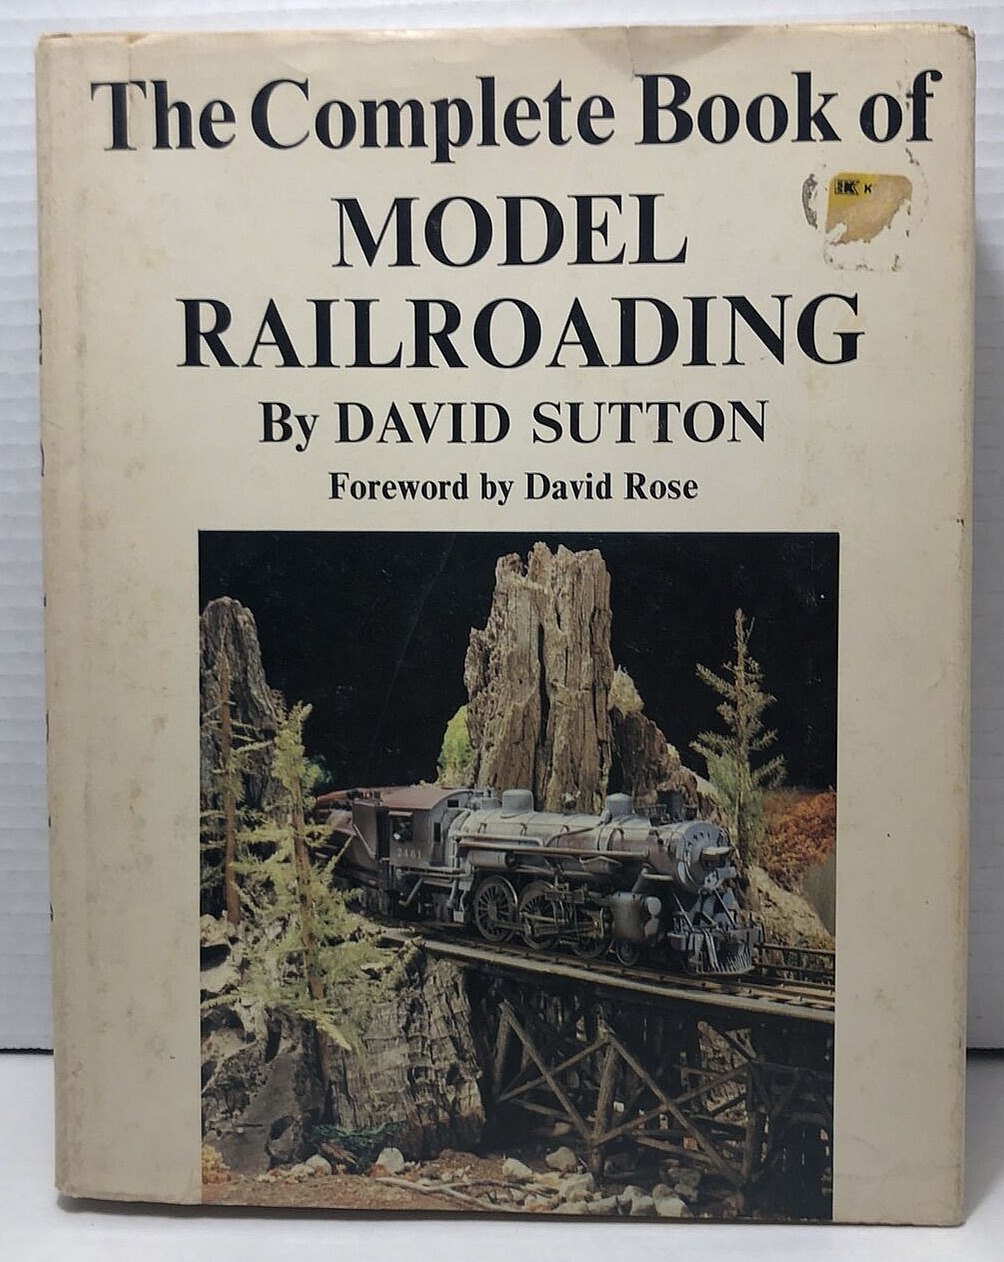 The Complete Book of Model Railroading by David Sutton 1978 Illustrated HCDJ